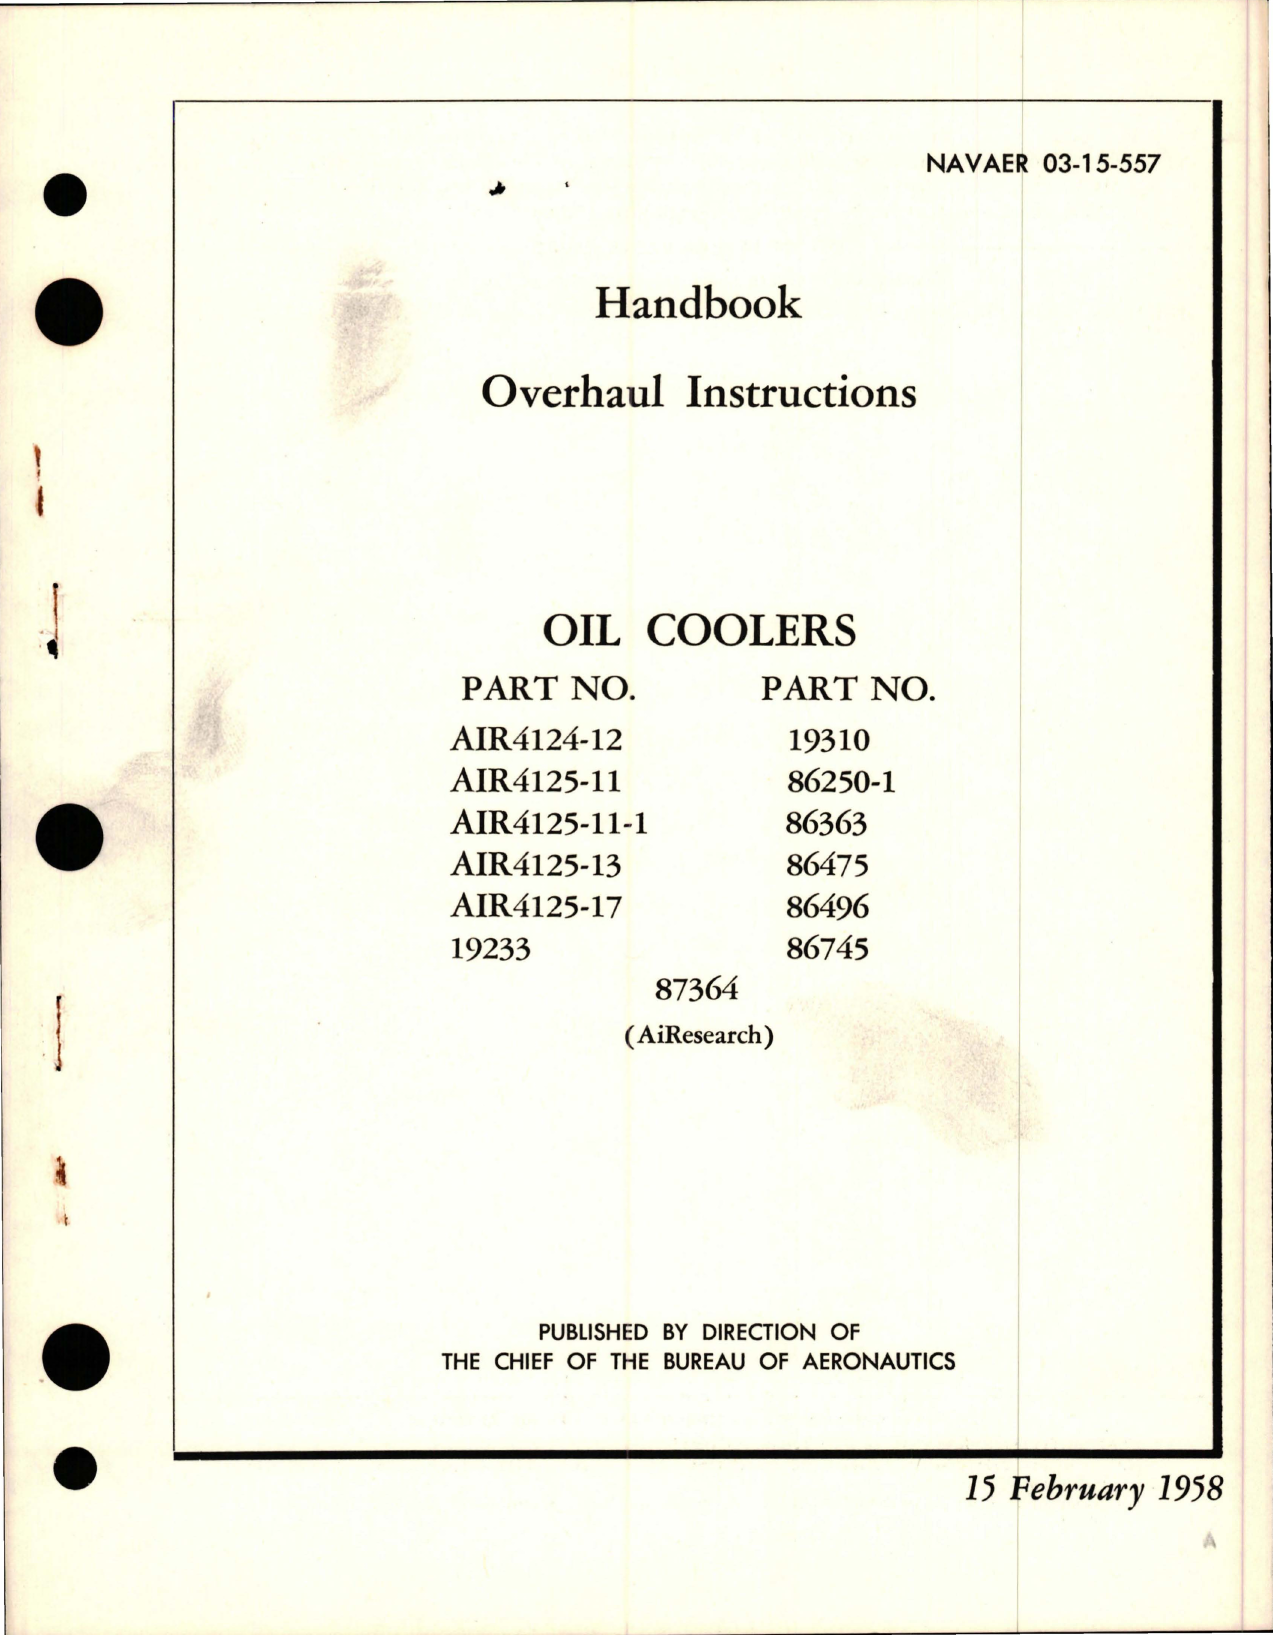 Sample page 1 from AirCorps Library document: Overhaul Instructions for Oil Coolers